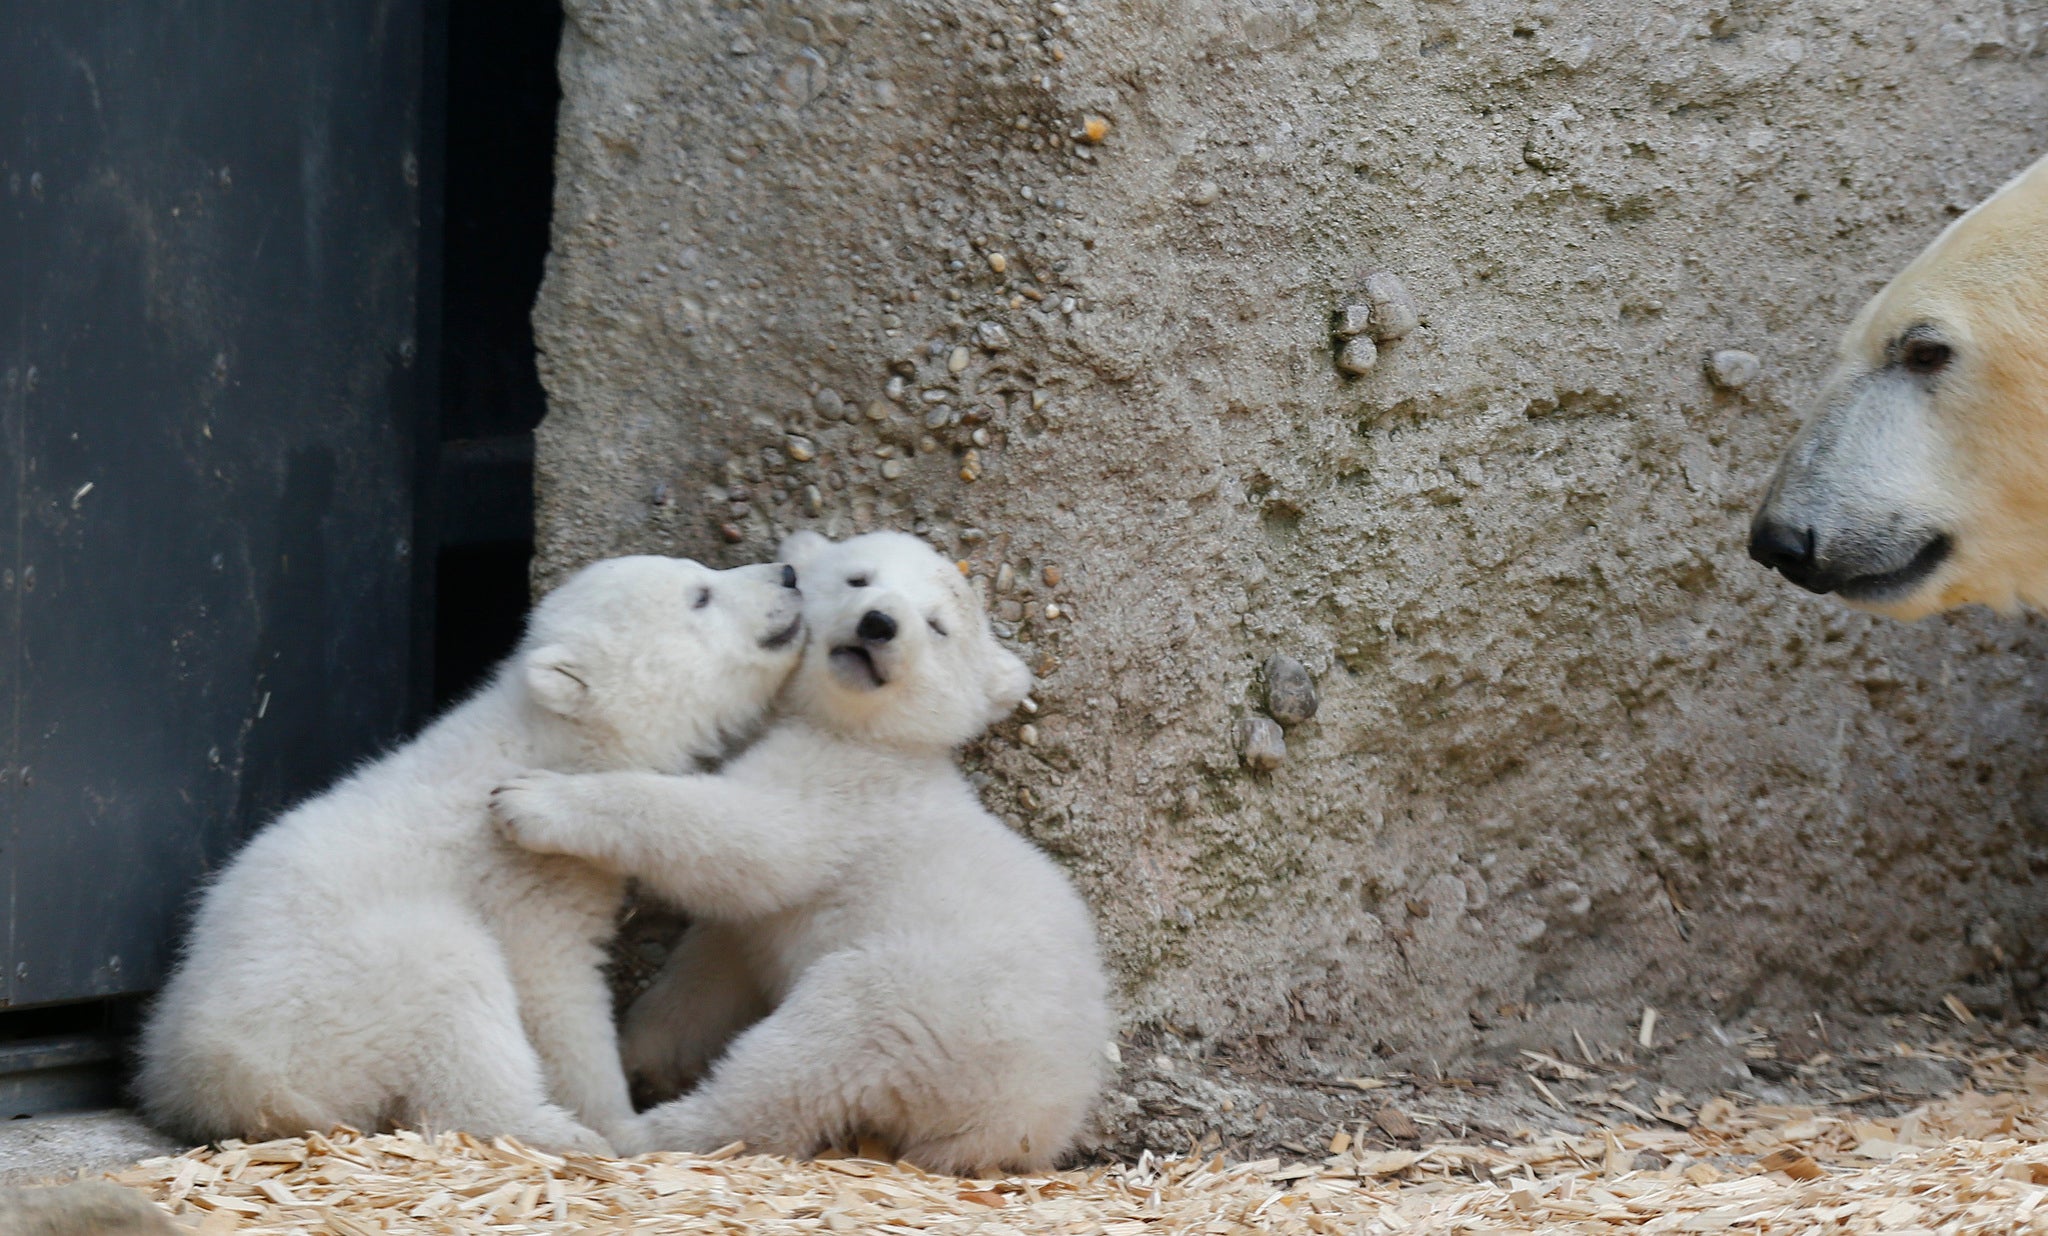 Polar bears: famed for their willingness to forego makeup on social media.